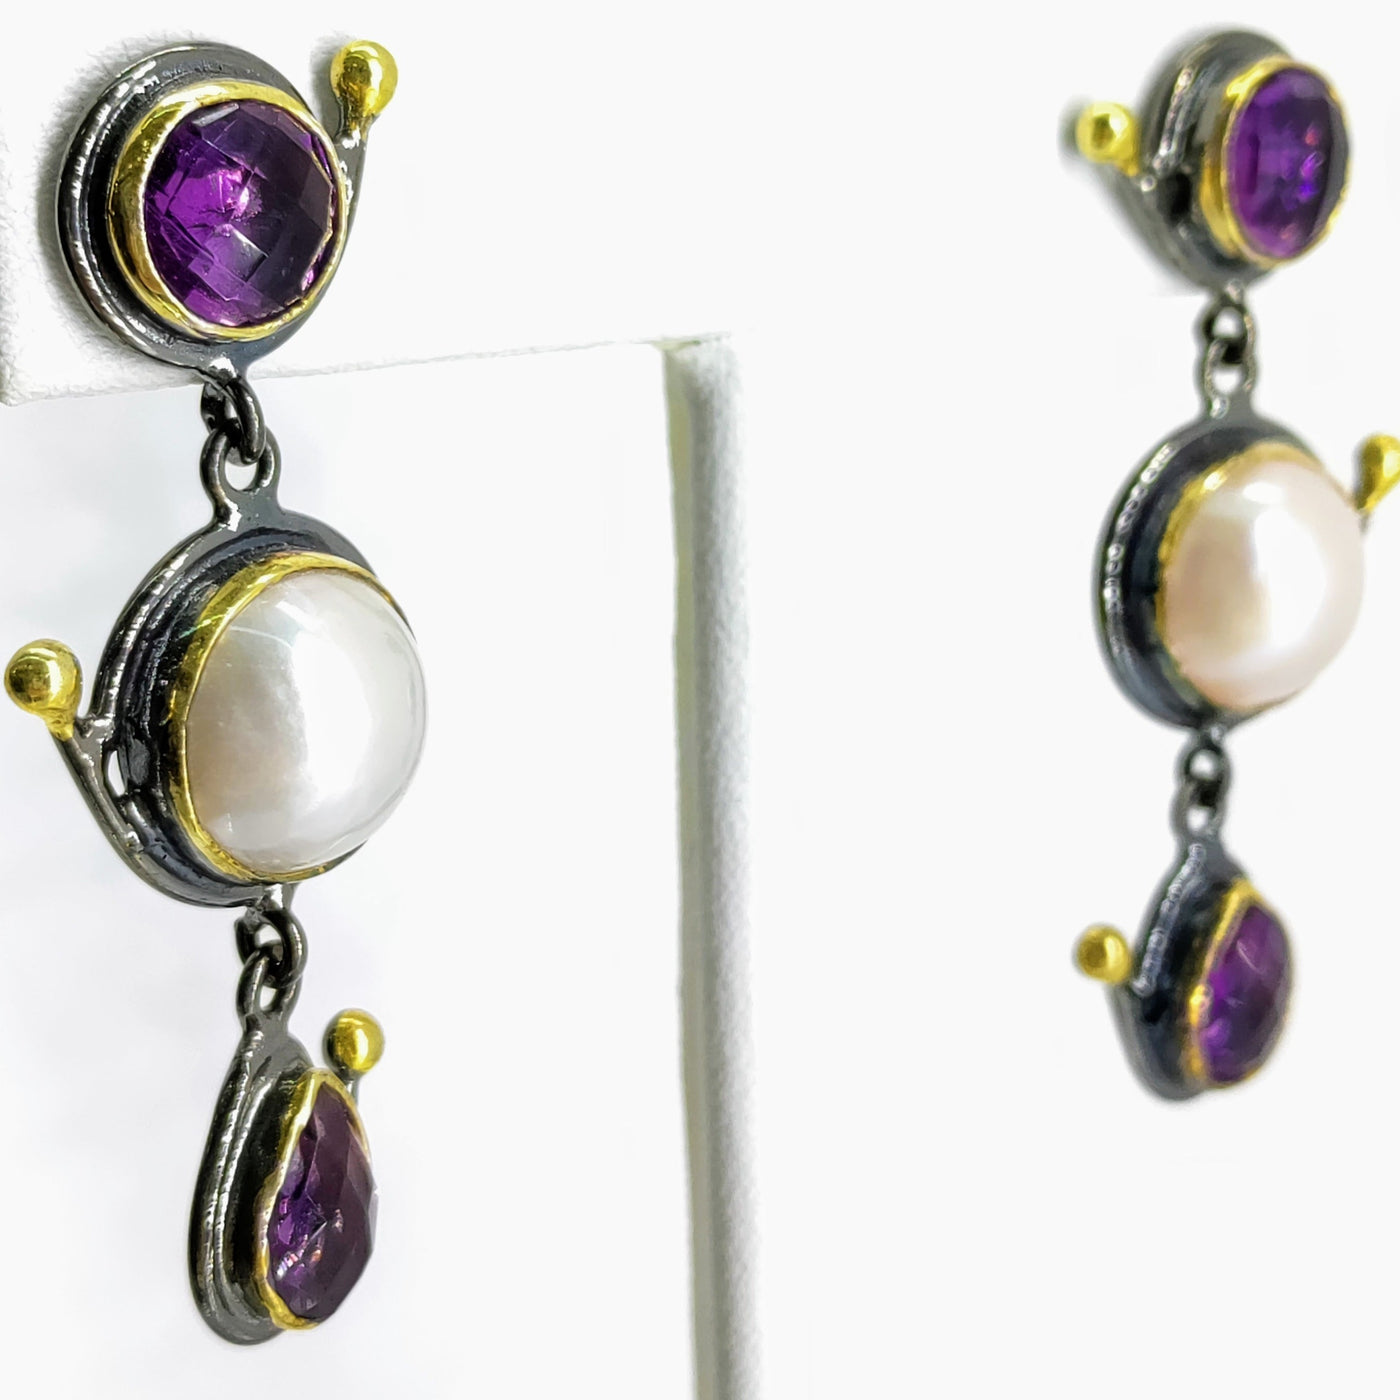 "Mabe' Today!" 2" Earrings - Amethyst, Mabe' Pearl, Black Sterling, 18k Accents